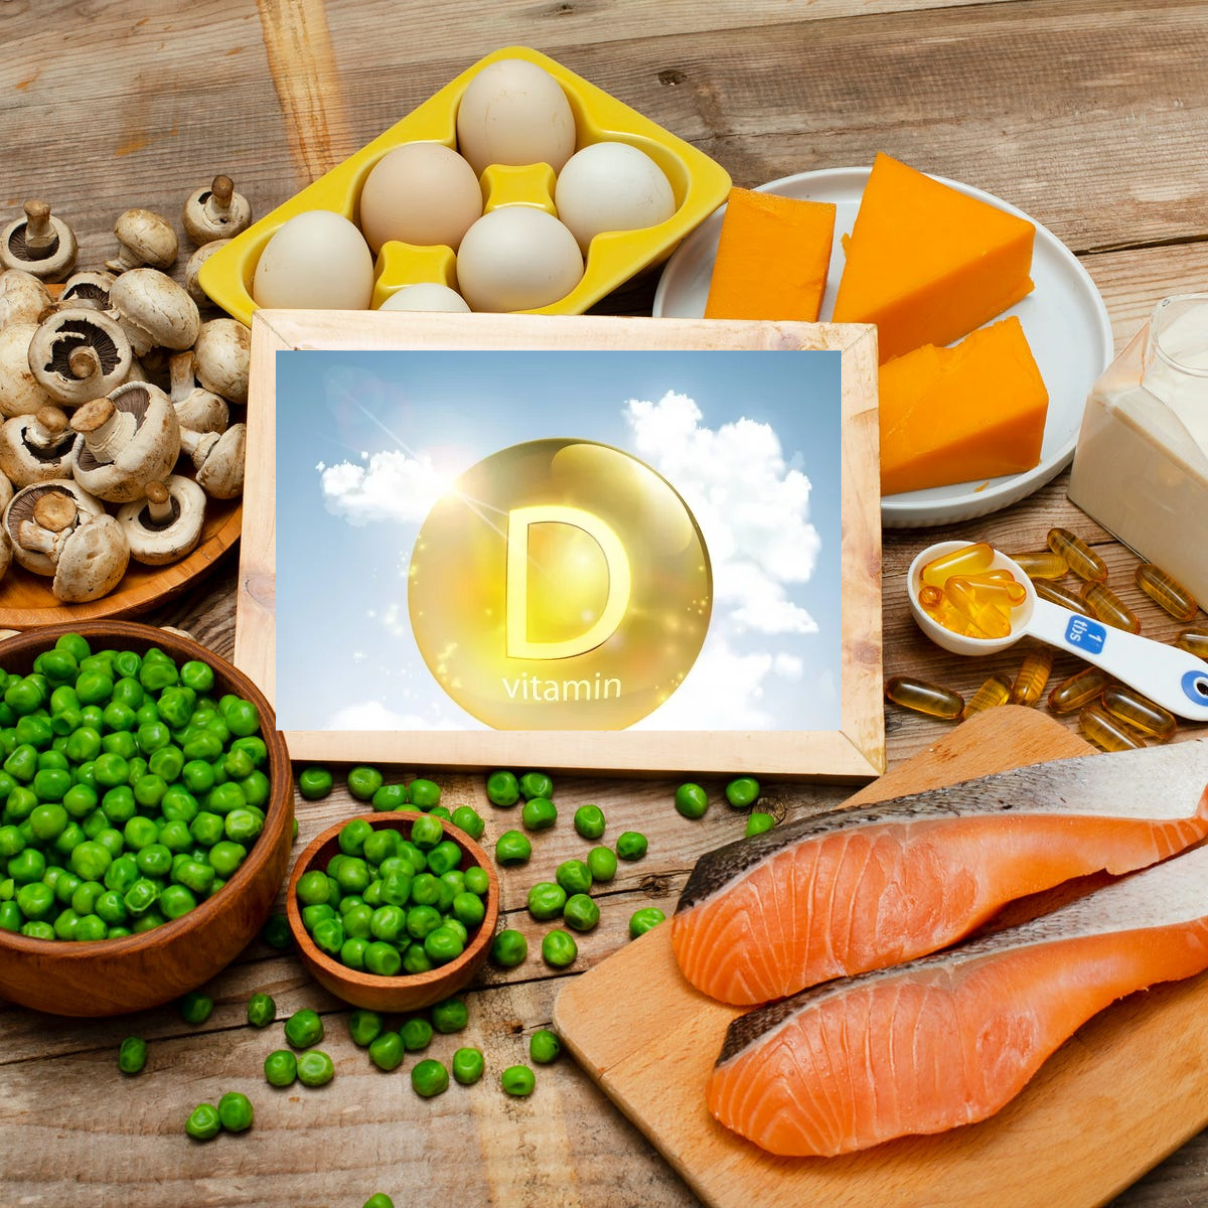 What Does Vitamin D do